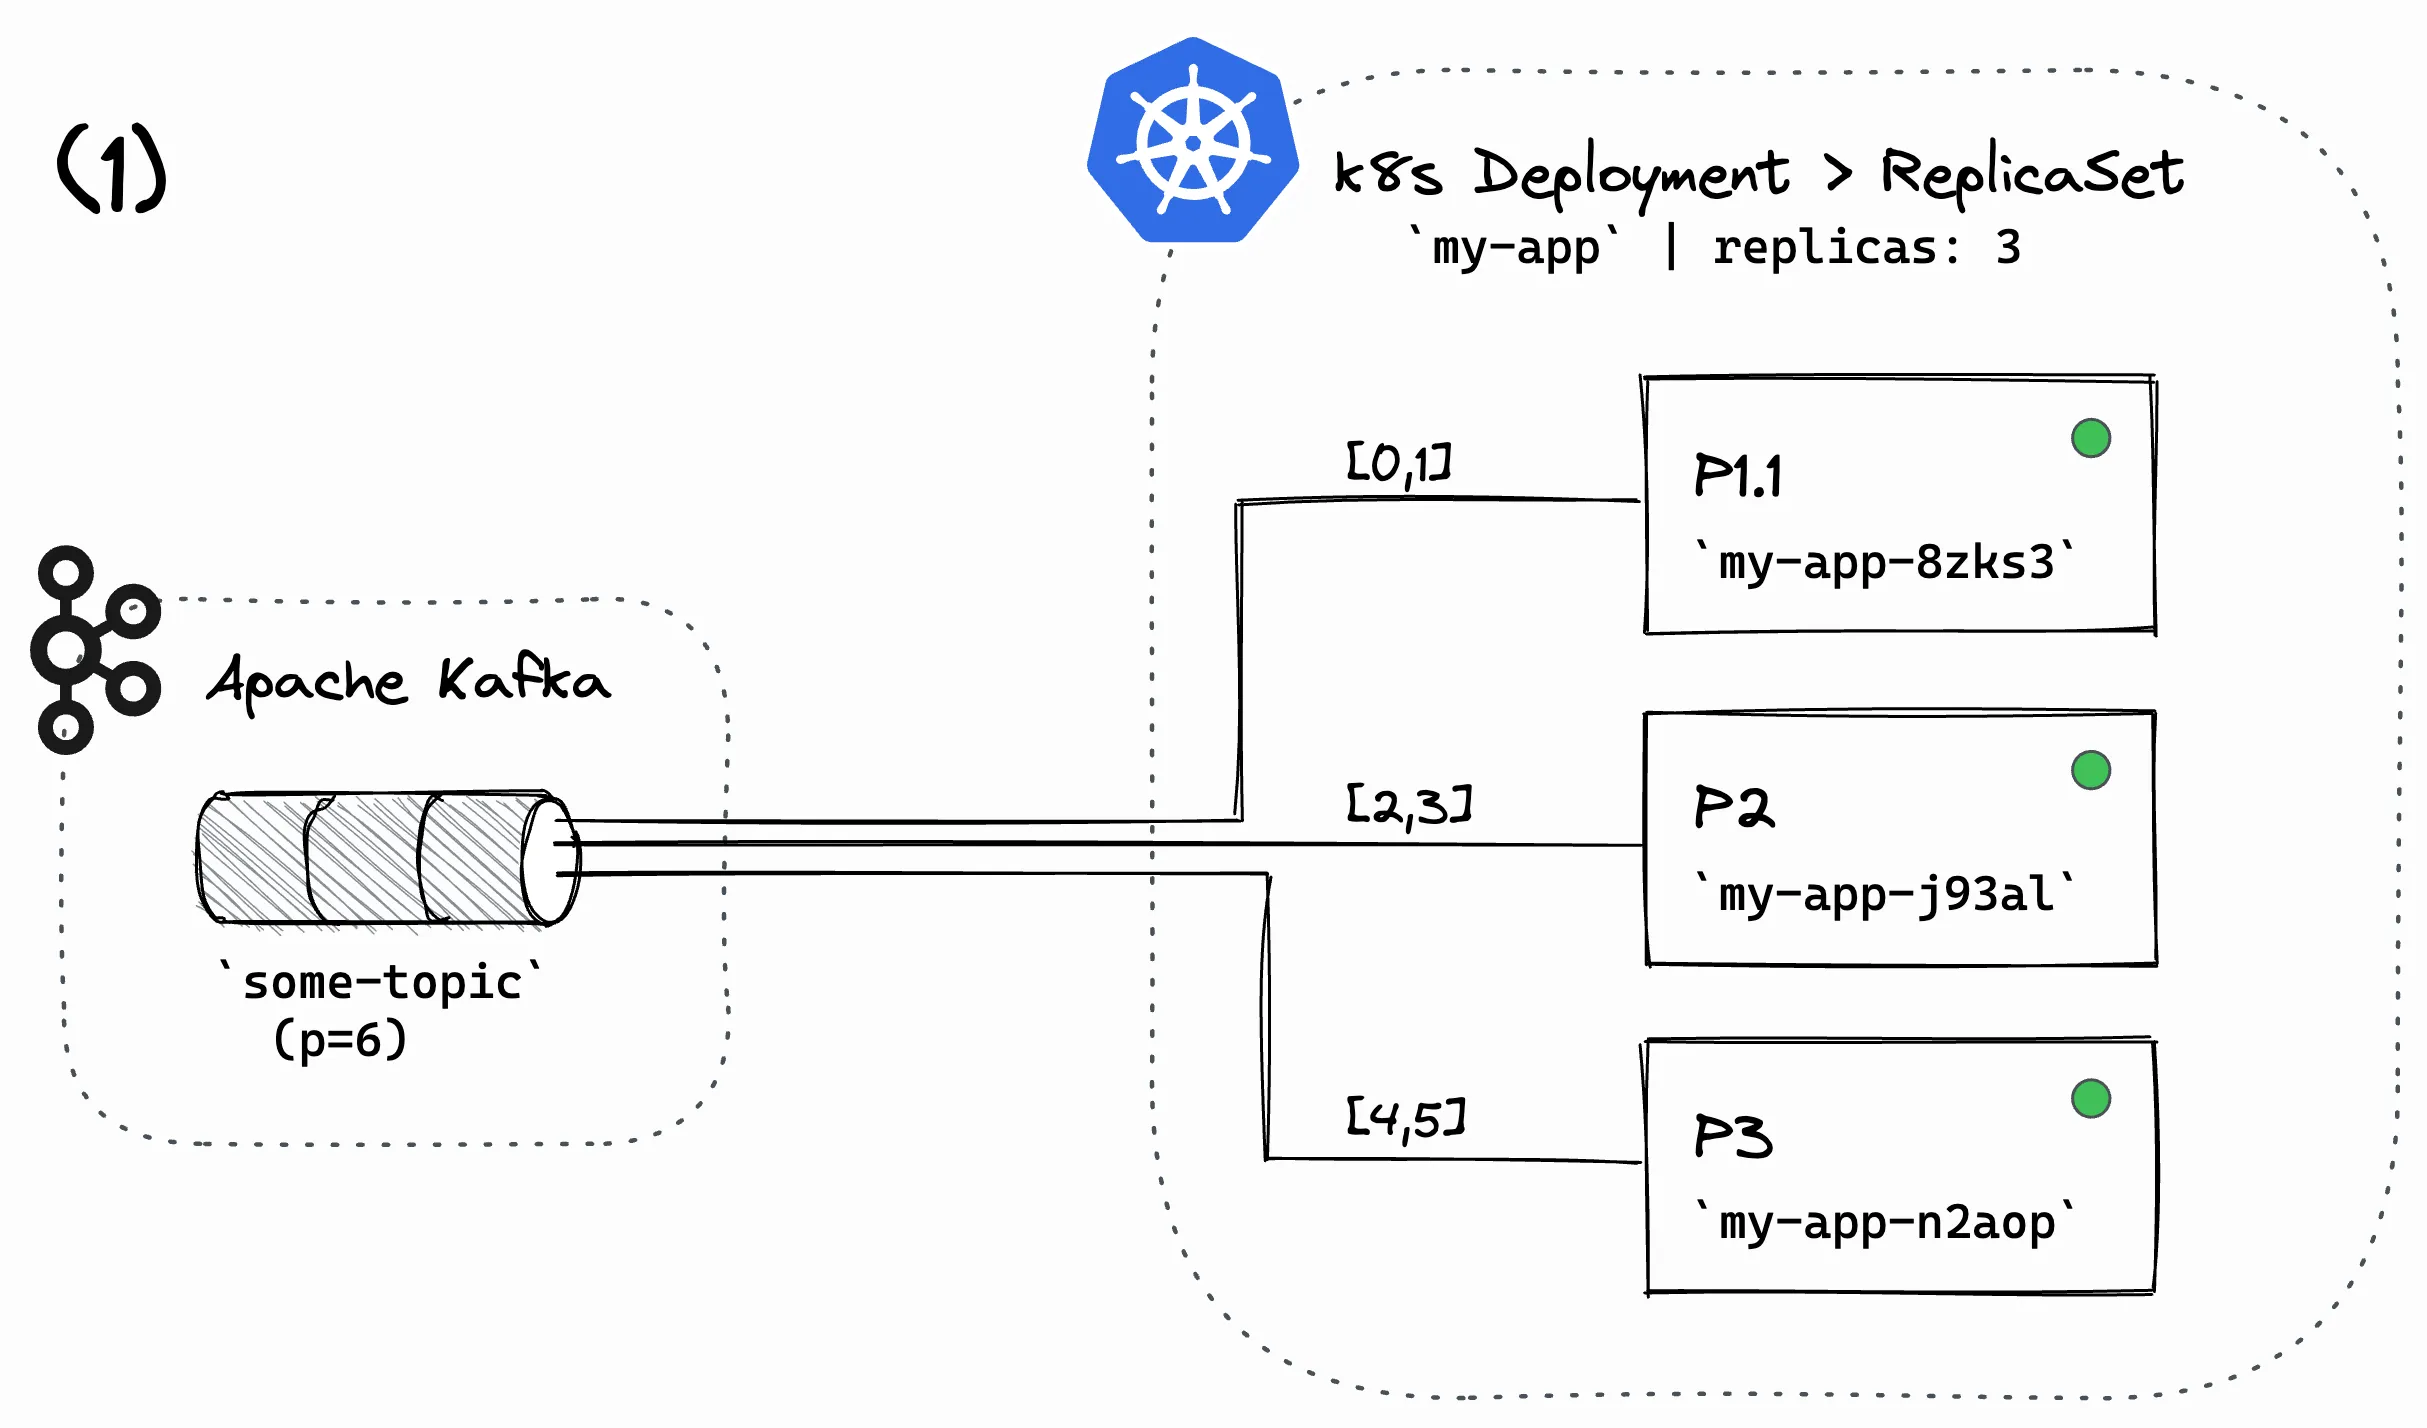 'Software Architecture' / 'Kubernetes Deployment' diagram, showing the setup of the simulation - Step 1